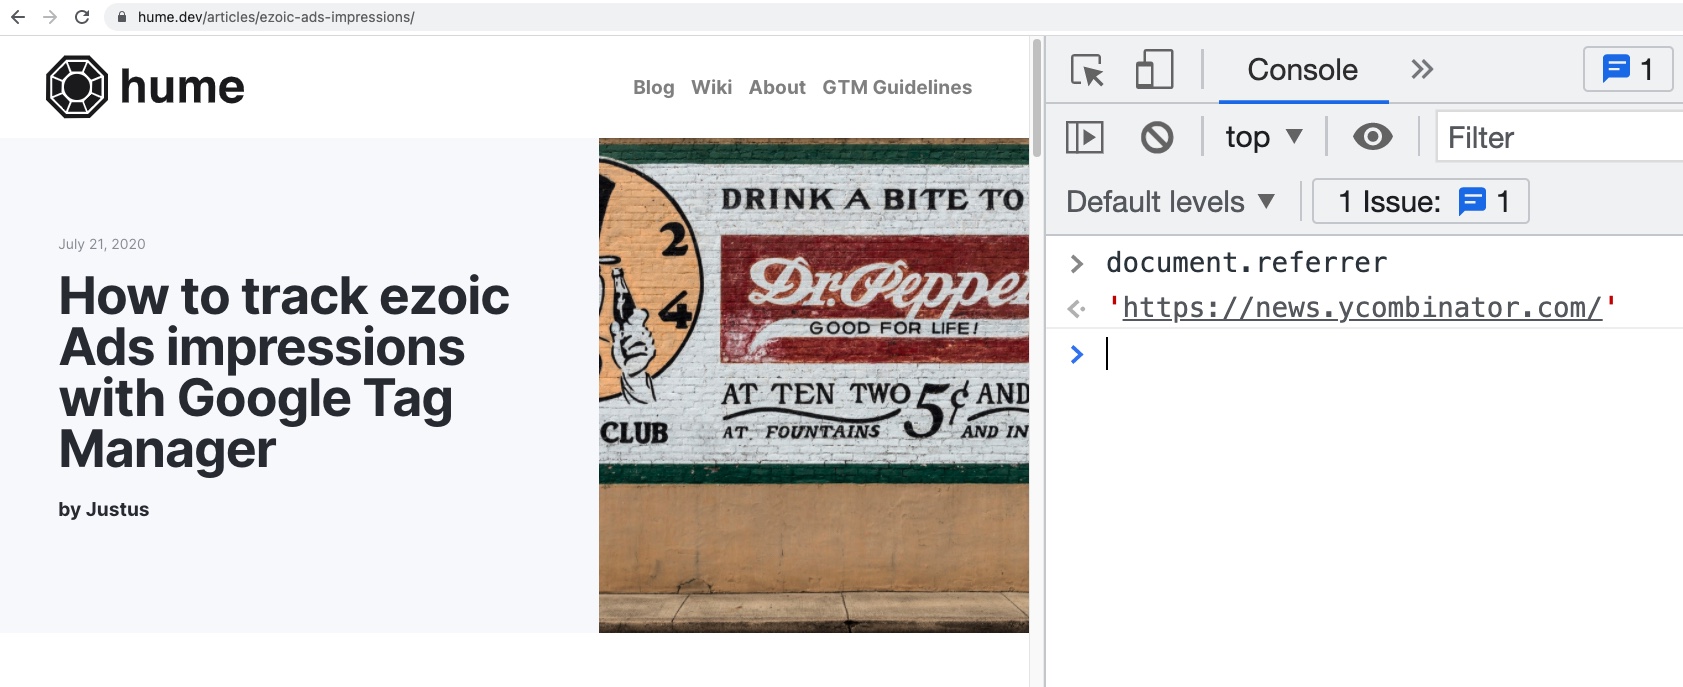 A screenshot of the Google Chrome JS Console with document.referrer typed into it, showing 'https://news.ycombinator.com' as the result